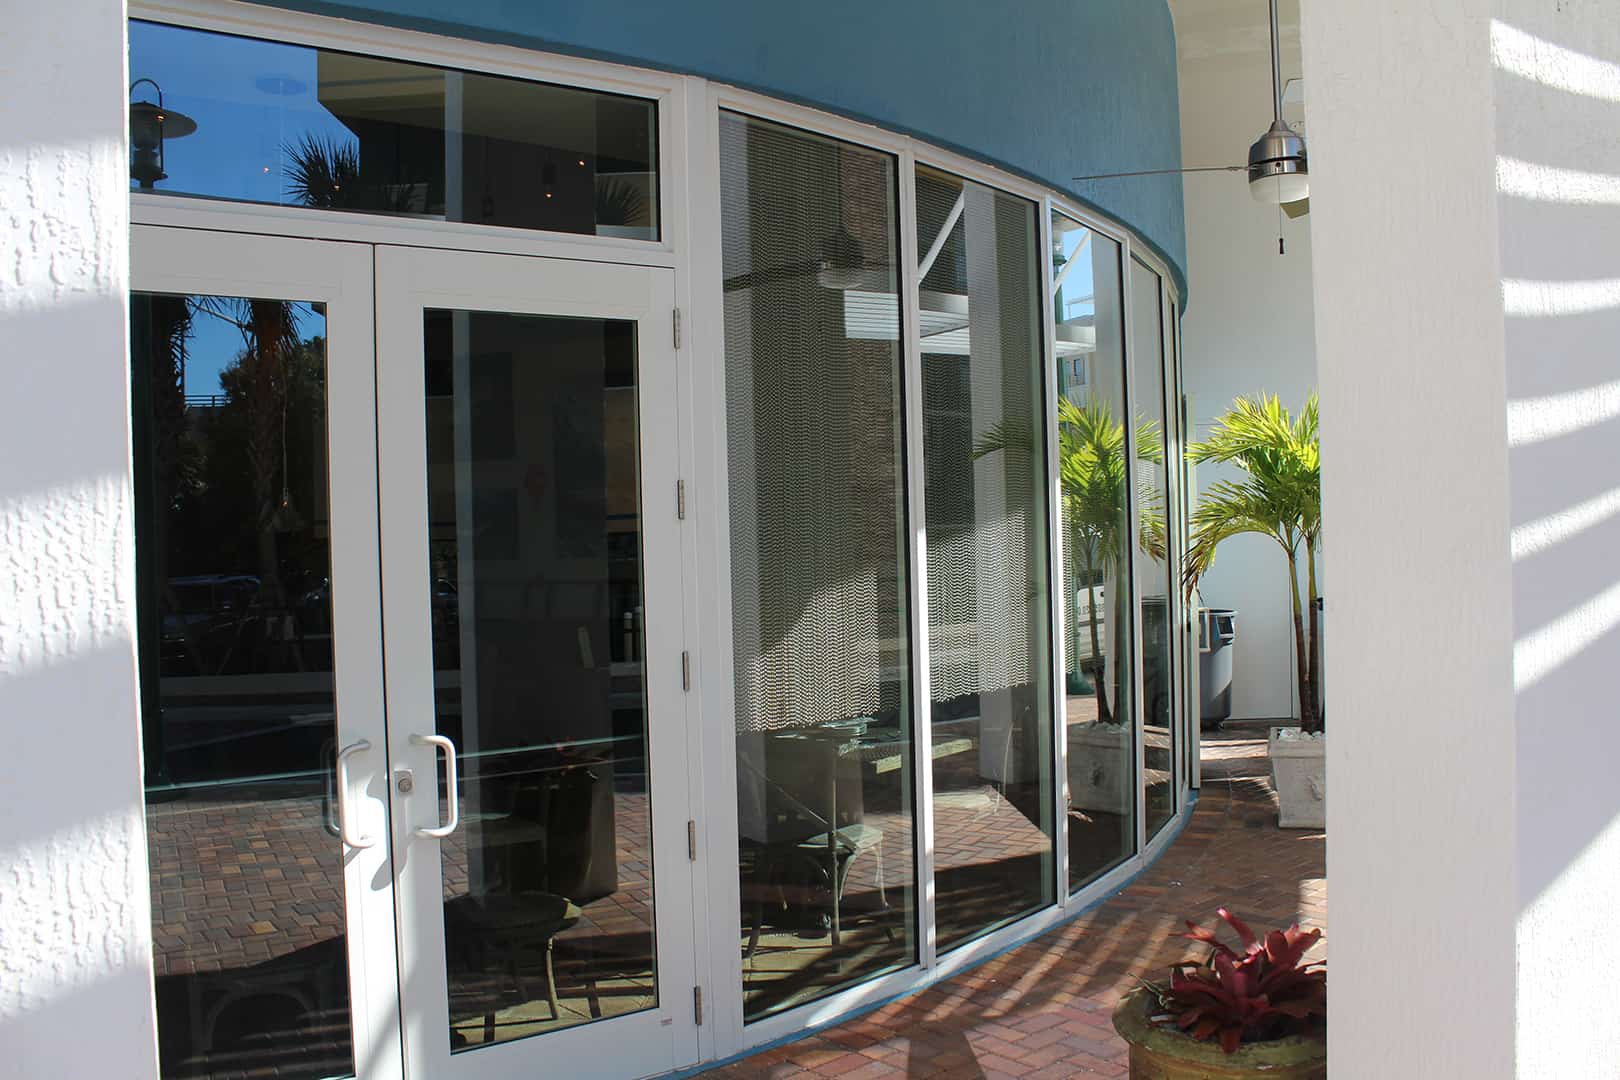 Curved outswing SMI-175 Impact Storefront System with Summit Impact Doors, floor-to-ceiling glass impact window, brick walkway, stucco exterior, tropical landscape to right of door and palm tree in background